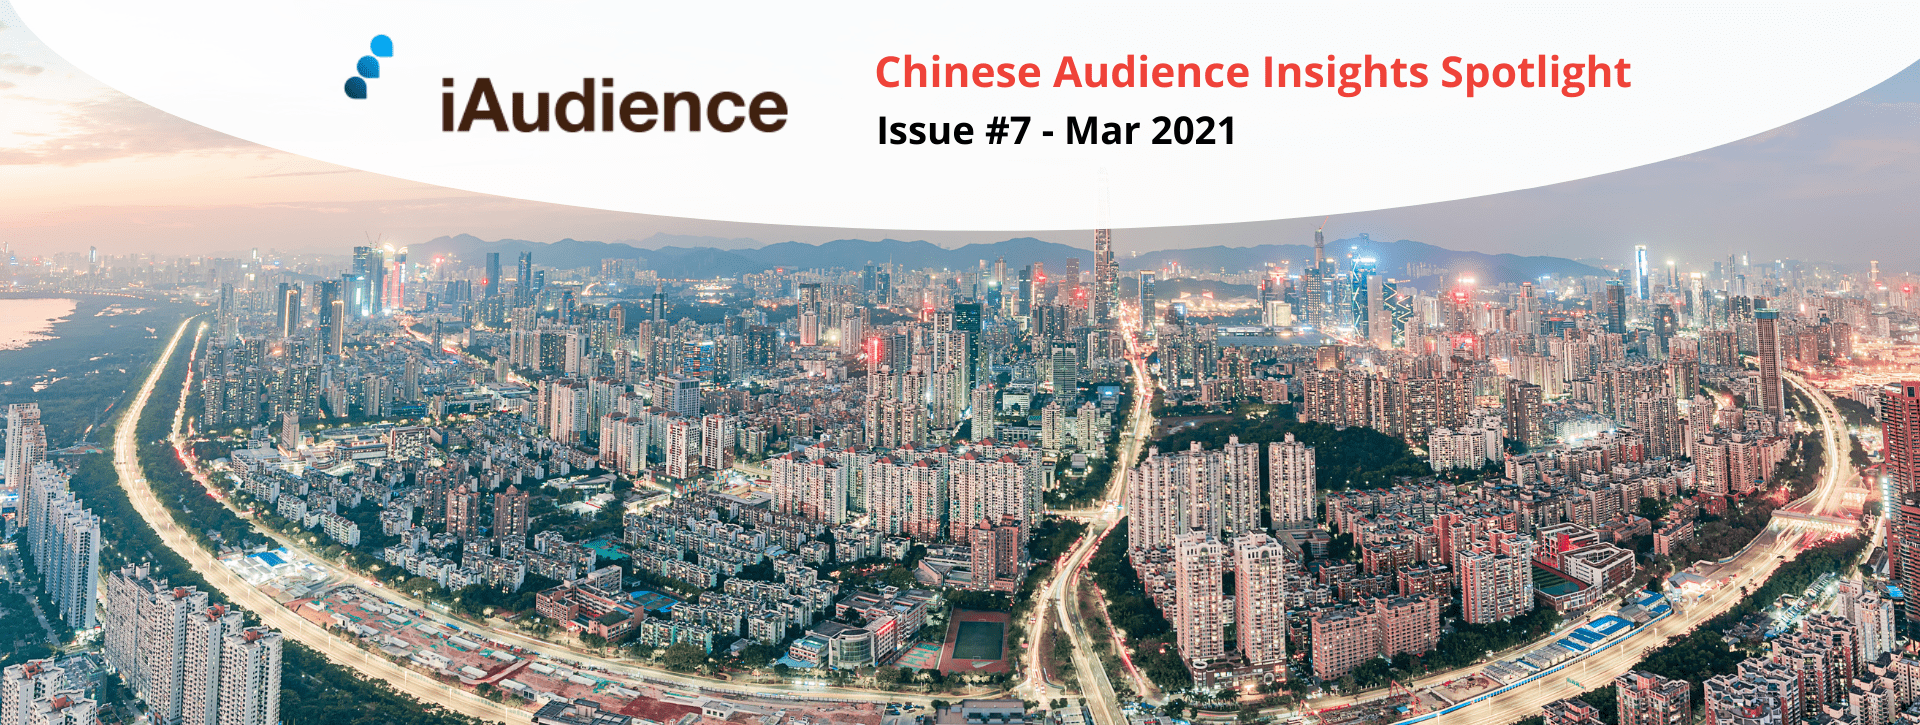 iAudience: Chinese Audiences Insights Spotlight Issue#7: Tapping into New Growth Opportunities in the Greater Bay Area